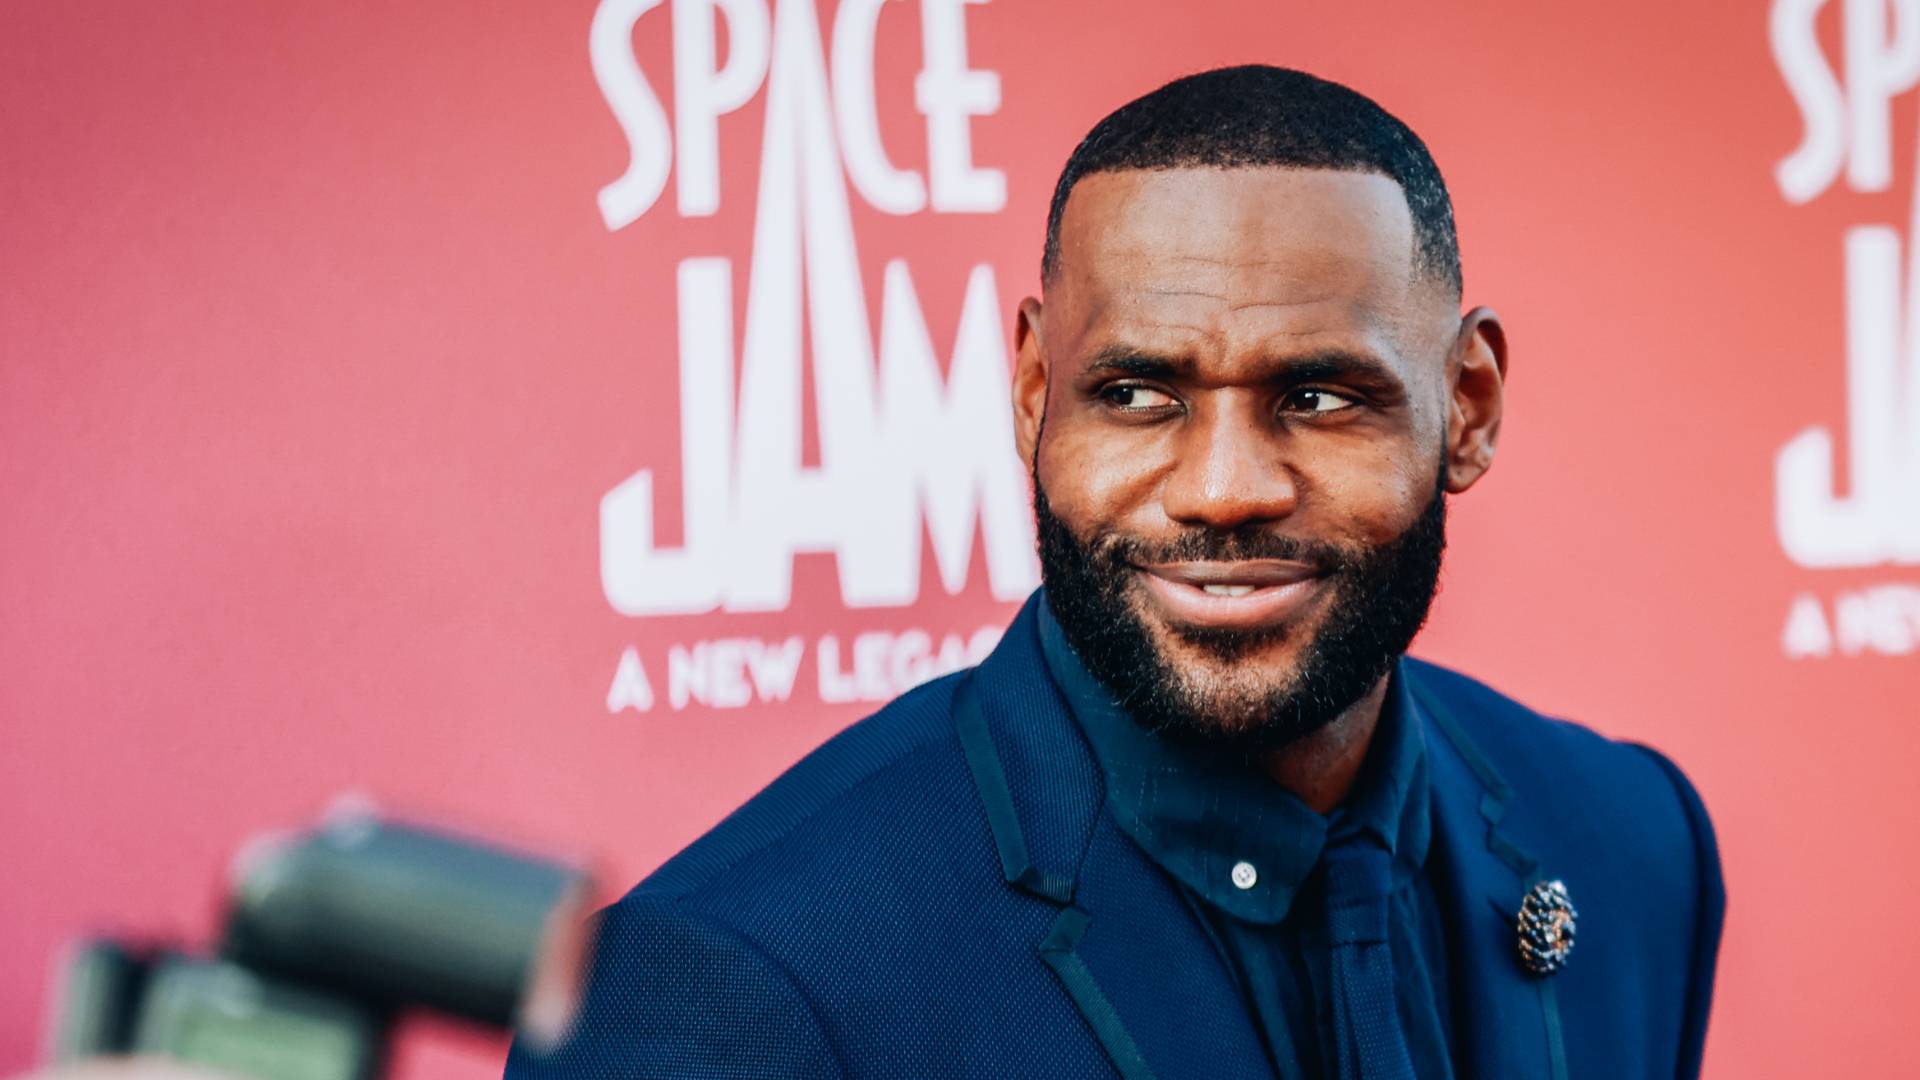 LeBron James attends the premiere of Warner Bros "Space Jam: A New Legacy" at Regal LA Live on July 12, 2021 in Los Angeles, California. 